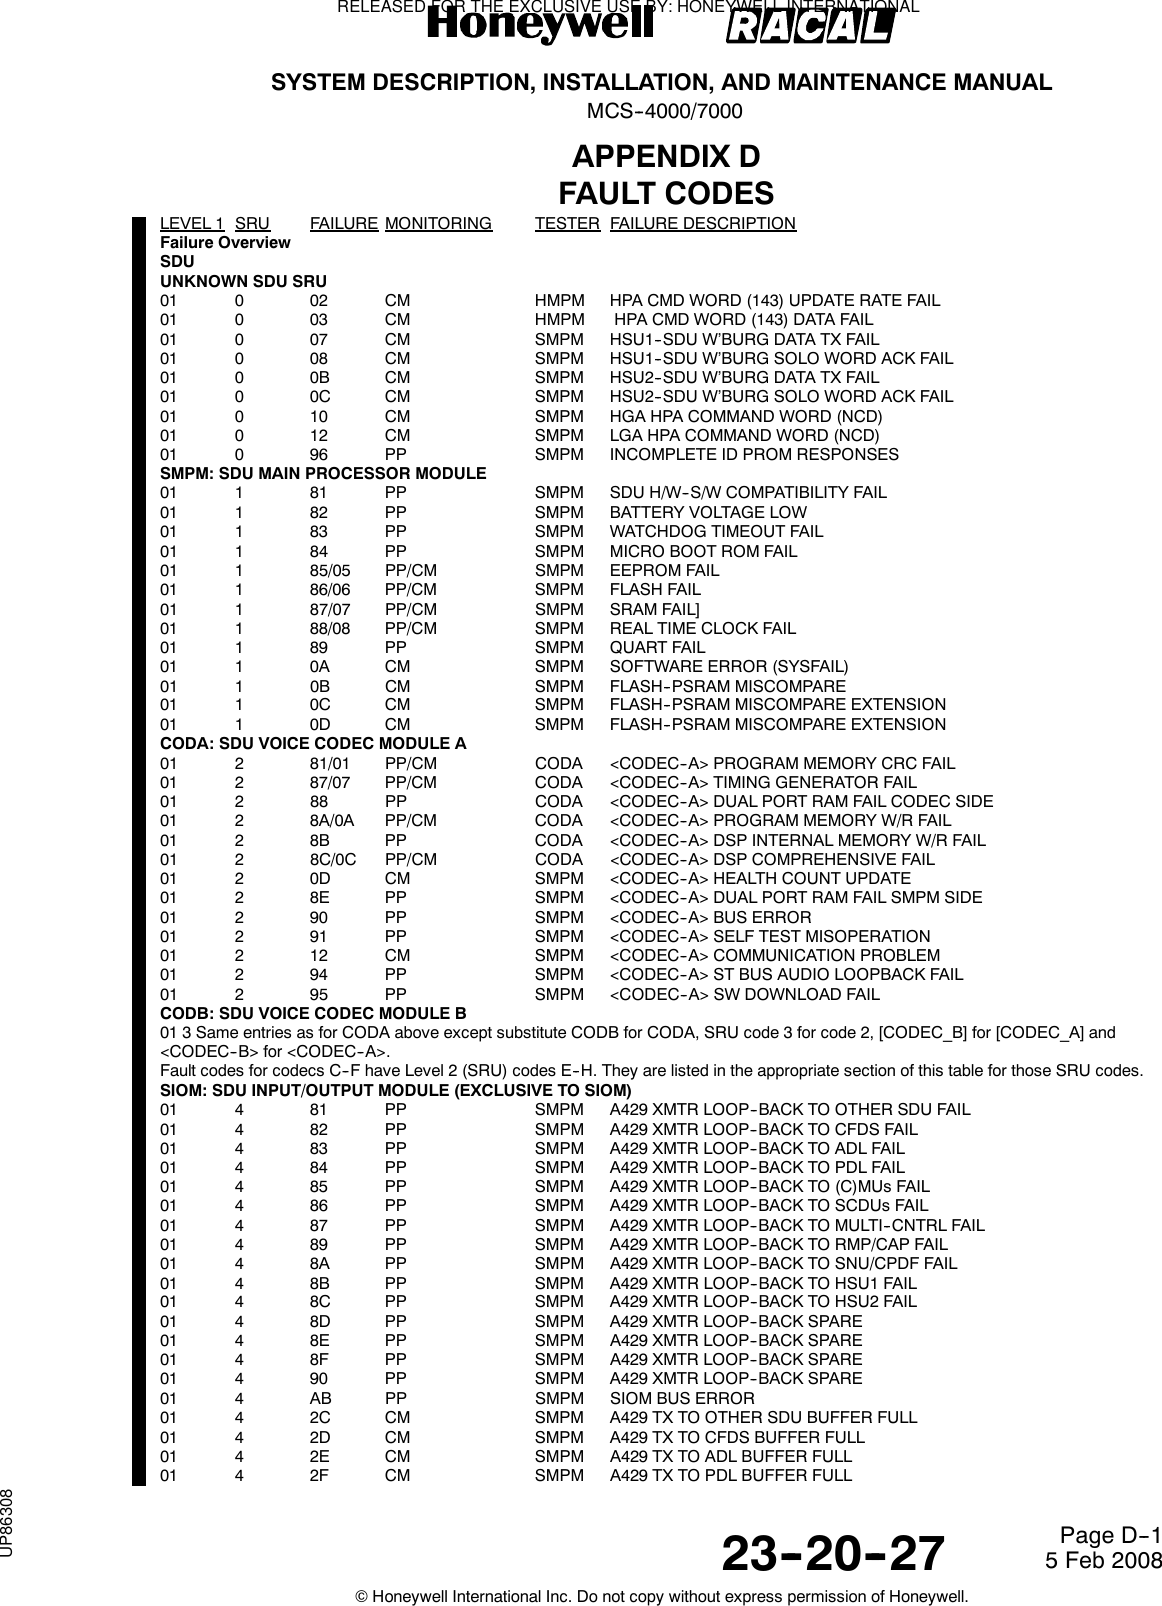 SYSTEM DESCRIPTION, INSTALLATION, AND MAINTENANCE MANUALMCS--4000/700023--20--27 5 Feb 2008©Honeywell International Inc. Do not copy without express permission of Honeywell.Page D--1APPENDIX DFAULT CODESLEVEL 1 SRU FAILURE MONITORING TESTER FAILURE DESCRIPTIONFailure OverviewSDUUNKNOWN SDU SRU01 0 02 CM HMPM HPA CMD WORD (143) UPDATE RATE FAIL01 0 03 CM HMPM HPA CMD WORD (143) DATA FAIL01 0 07 CM SMPM HSU1--SDU W’BURG DATA TX FAIL01 0 08 CM SMPM HSU1--SDU W’BURG SOLO WORD ACK FAIL01 0 0B CM SMPM HSU2--SDU W’BURG DATA TX FAIL01 0 0C CM SMPM HSU2--SDU W’BURG SOLO WORD ACK FAIL01 0 10 CM SMPM HGA HPA COMMAND WORD (NCD)01 0 12 CM SMPM LGA HPA COMMAND WORD (NCD)01 0 96 PP SMPM INCOMPLETE ID PROM RESPONSESSMPM: SDU MAIN PROCESSOR MODULE01 1 81 PP SMPM SDU H/W--S/W COMPATIBILITY FAIL01 1 82 PP SMPM BATTERY VOLTAGE LOW01 1 83 PP SMPM WATCHDOG TIMEOUT FAIL01 1 84 PP SMPM MICRO BOOT ROM FAIL01 1 85/05 PP/CM SMPM EEPROM FAIL01 1 86/06 PP/CM SMPM FLASH FAIL01 1 87/07 PP/CM SMPM SRAM FAIL]01 1 88/08 PP/CM SMPM REAL TIME CLOCK FAIL01 1 89 PP SMPM QUART FAIL01 1 0A CM SMPM SOFTWARE ERROR (SYSFAIL)01 1 0B CM SMPM FLASH--PSRAM MISCOMPARE01 1 0C CM SMPM FLASH--PSRAM MISCOMPARE EXTENSION01 1 0D CM SMPM FLASH--PSRAM MISCOMPARE EXTENSIONCODA: SDU VOICE CODEC MODULE A01 2 81/01 PP/CM CODA &lt;CODEC--A&gt; PROGRAM MEMORY CRC FAIL01 2 87/07 PP/CM CODA &lt;CODEC--A&gt; TIMING GENERATOR FAIL01 2 88 PP CODA &lt;CODEC--A&gt; DUAL PORT RAM FAIL CODEC SIDE01 2 8A/0A PP/CM CODA &lt;CODEC--A&gt; PROGRAM MEMORY W/R FAIL01 2 8B PP CODA &lt;CODEC--A&gt; DSP INTERNAL MEMORY W/R FAIL01 2 8C/0C PP/CM CODA &lt;CODEC--A&gt; DSP COMPREHENSIVE FAIL01 2 0D CM SMPM &lt;CODEC--A&gt; HEALTH COUNT UPDATE01 2 8E PP SMPM &lt;CODEC--A&gt; DUAL PORT RAM FAIL SMPM SIDE01 2 90 PP SMPM &lt;CODEC--A&gt; BUS ERROR01 2 91 PP SMPM &lt;CODEC--A&gt; SELF TEST MISOPERATION01 2 12 CM SMPM &lt;CODEC--A&gt; COMMUNICATION PROBLEM01 2 94 PP SMPM &lt;CODEC--A&gt; ST BUS AUDIO LOOPBACK FAIL01 2 95 PP SMPM &lt;CODEC--A&gt; SW DOWNLOAD FAILCODB: SDU VOICE CODEC MODULE B01 3 Same entries as for CODA above except substitute CODB for CODA, SRU code 3 for code 2, [CODEC_B] for [CODEC_A] and&lt;CODEC--B&gt; for &lt;CODEC--A&gt;.Fault codes for codecs C--F have Level 2 (SRU) codes E--H. They are listed in the appropriate section of this table for those SRU codes.SIOM: SDU INPUT/OUTPUT MODULE (EXCLUSIVE TO SIOM)01 4 81 PP SMPM A429 XMTR LOOP--BACK TO OTHER SDU FAIL01 4 82 PP SMPM A429 XMTR LOOP--BACK TO CFDS FAIL01 4 83 PP SMPM A429 XMTR LOOP--BACK TO ADL FAIL01 4 84 PP SMPM A429 XMTR LOOP--BACK TO PDL FAIL01 4 85 PP SMPM A429 XMTR LOOP--BACK TO (C)MUs FAIL01 4 86 PP SMPM A429 XMTR LOOP--BACK TO SCDUs FAIL01 4 87 PP SMPM A429 XMTR LOOP--BACK TO MULTI--CNTRL FAIL01 4 89 PP SMPM A429 XMTR LOOP--BACK TO RMP/CAP FAIL01 4 8A PP SMPM A429 XMTR LOOP--BACK TO SNU/CPDF FAIL01 4 8B PP SMPM A429 XMTR LOOP--BACK TO HSU1 FAIL01 4 8C PP SMPM A429 XMTR LOOP--BACK TO HSU2 FAIL01 4 8D PP SMPM A429 XMTR LOOP--BACK SPARE01 4 8E PP SMPM A429 XMTR LOOP--BACK SPARE01 4 8F PP SMPM A429 XMTR LOOP--BACK SPARE01 4 90 PP SMPM A429 XMTR LOOP--BACK SPARE01 4 AB PP SMPM SIOM BUS ERROR01 4 2C CM SMPM A429 TX TO OTHER SDU BUFFER FULL01 4 2D CM SMPM A429 TX TO CFDS BUFFER FULL01 4 2E CM SMPM A429 TX TO ADL BUFFER FULL01 4 2F CM SMPM A429 TX TO PDL BUFFER FULLRELEASED FOR THE EXCLUSIVE USE BY: HONEYWELL INTERNATIONALUP86308